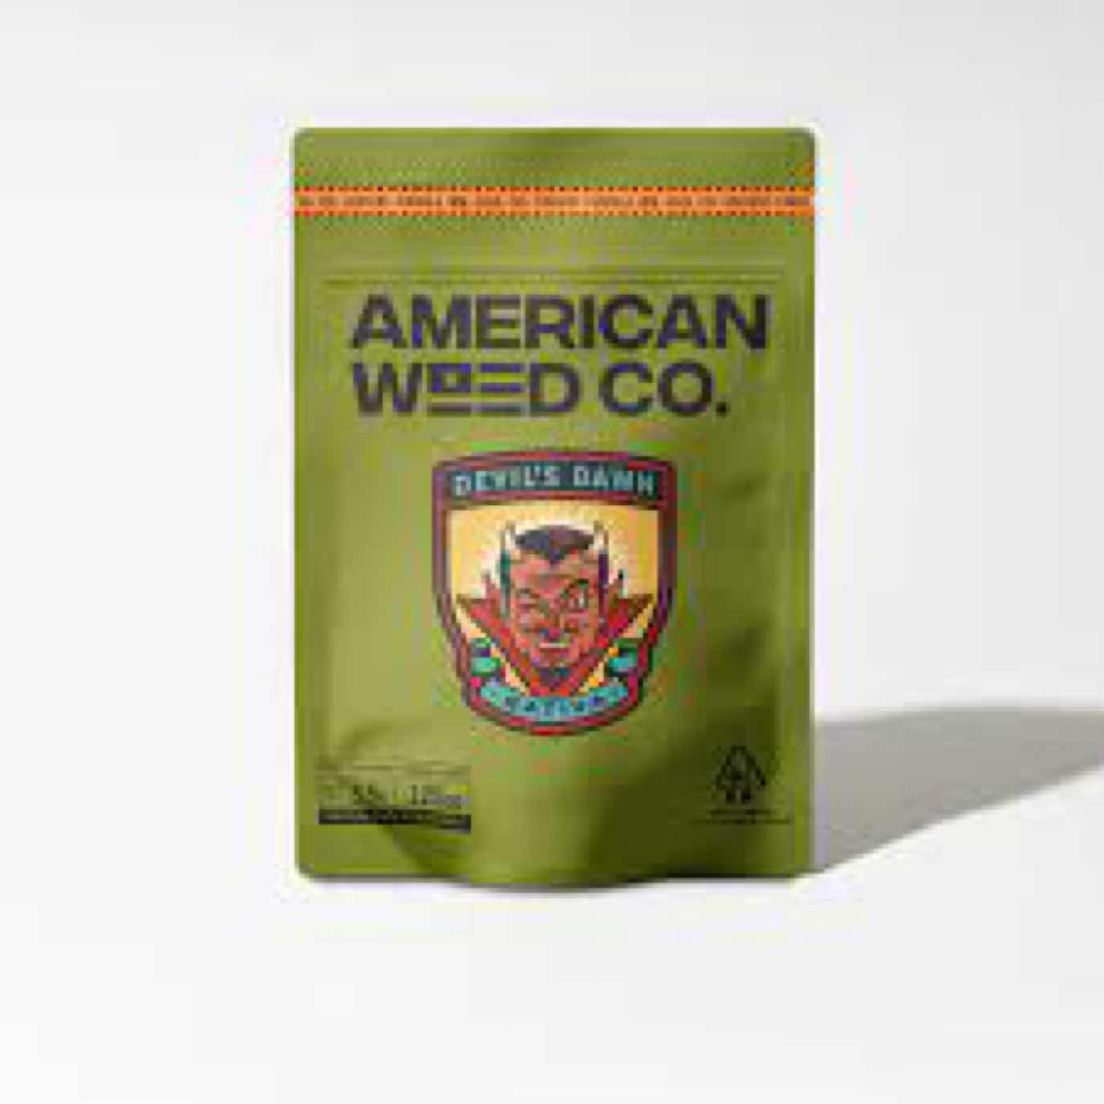 [American Weed Company] Infused Flower - 3.5g - Devil's Dawn - HIGH THC